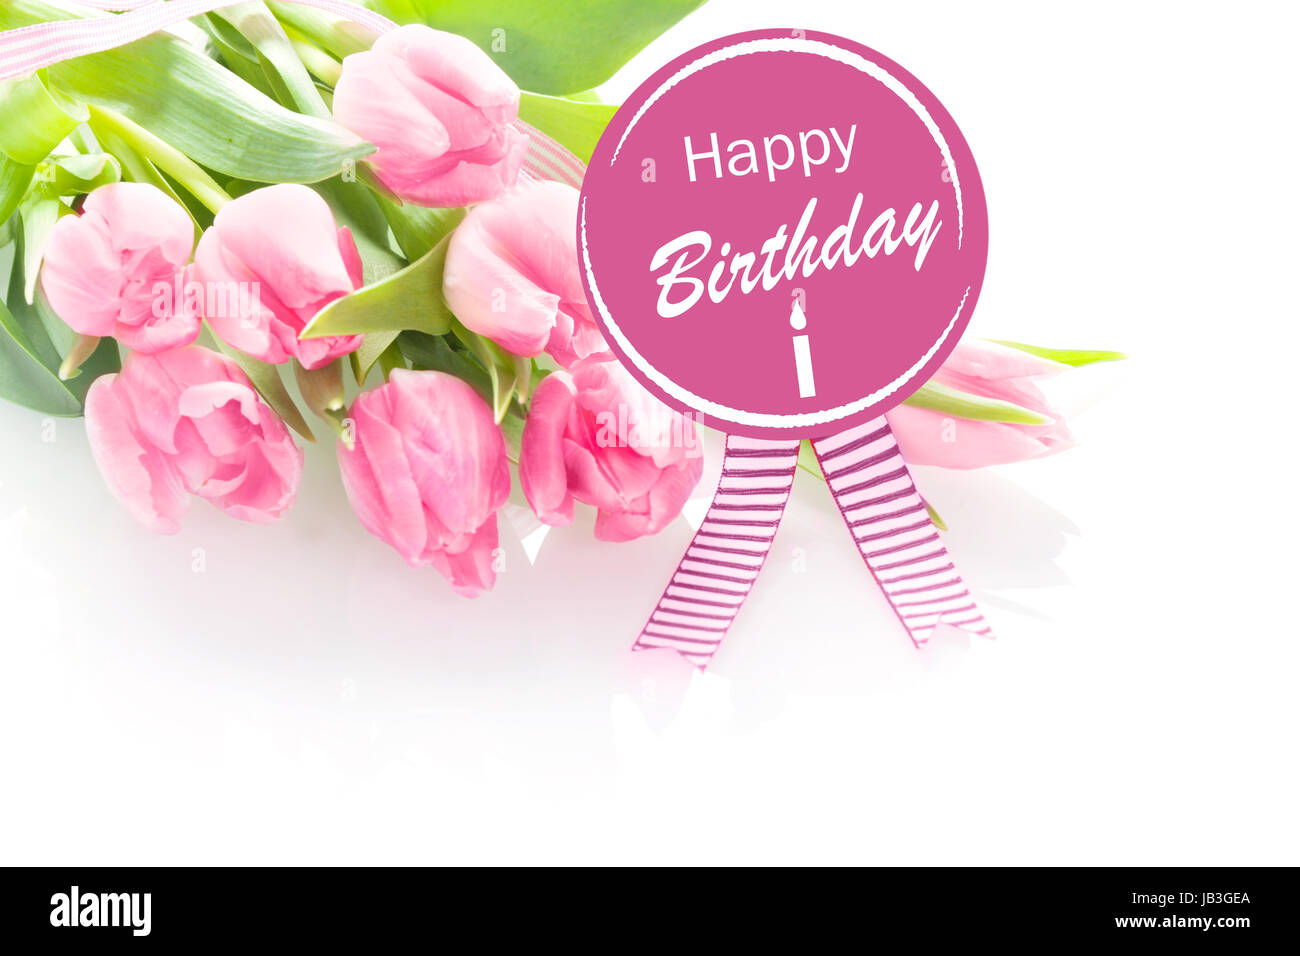 Bunch of beautiful fresh pink tulips with a Happy Birthday greeting ...